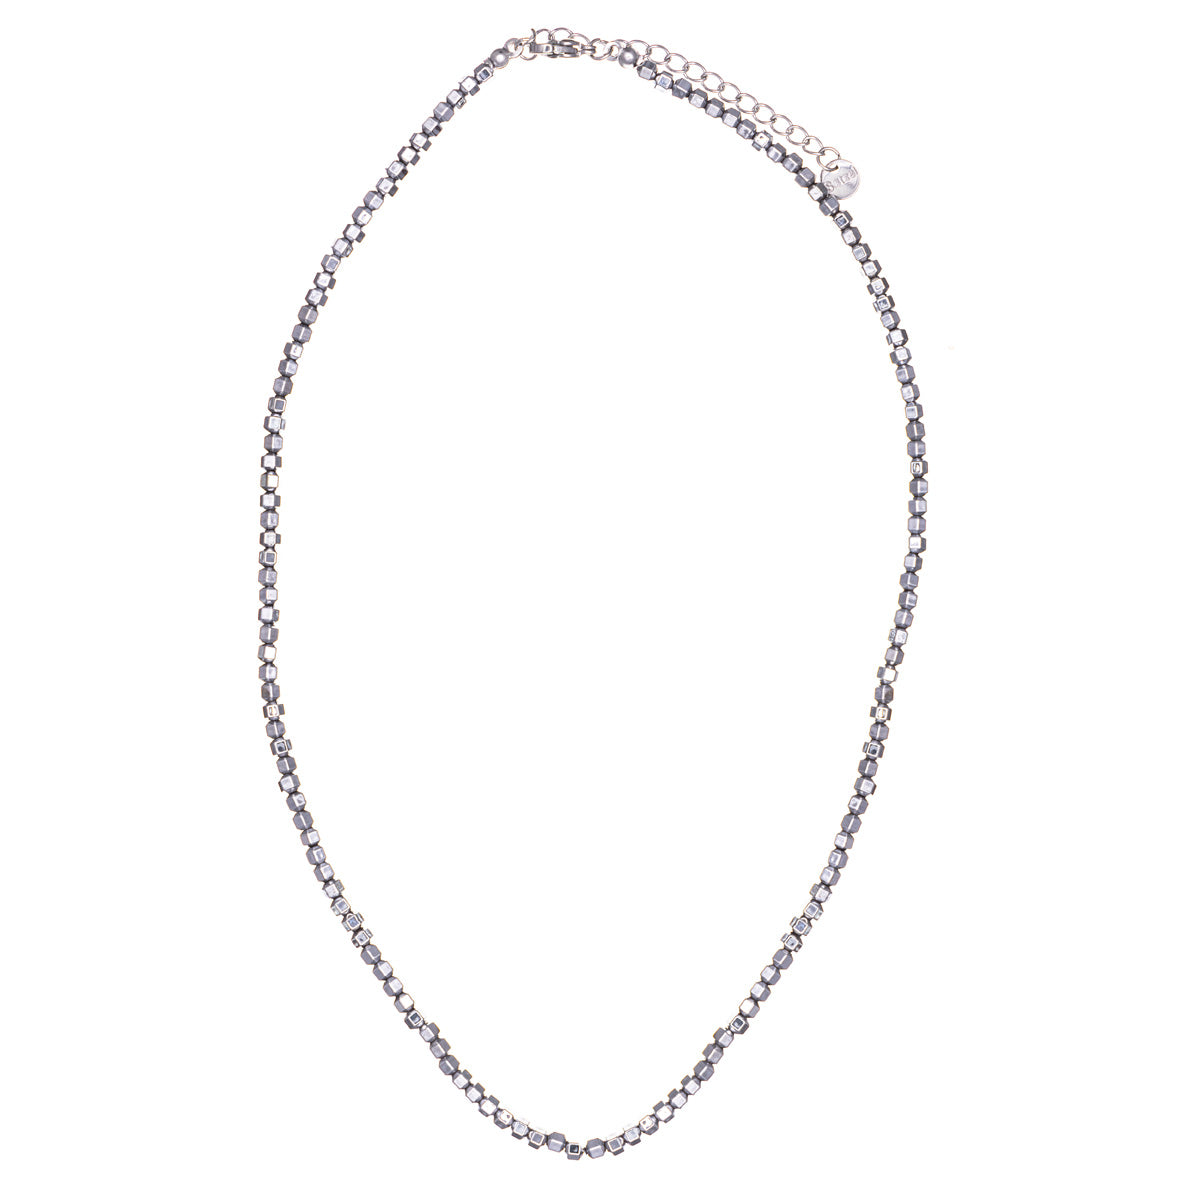 Thin silver bead necklace 40cm +5cm (Steel 316L)